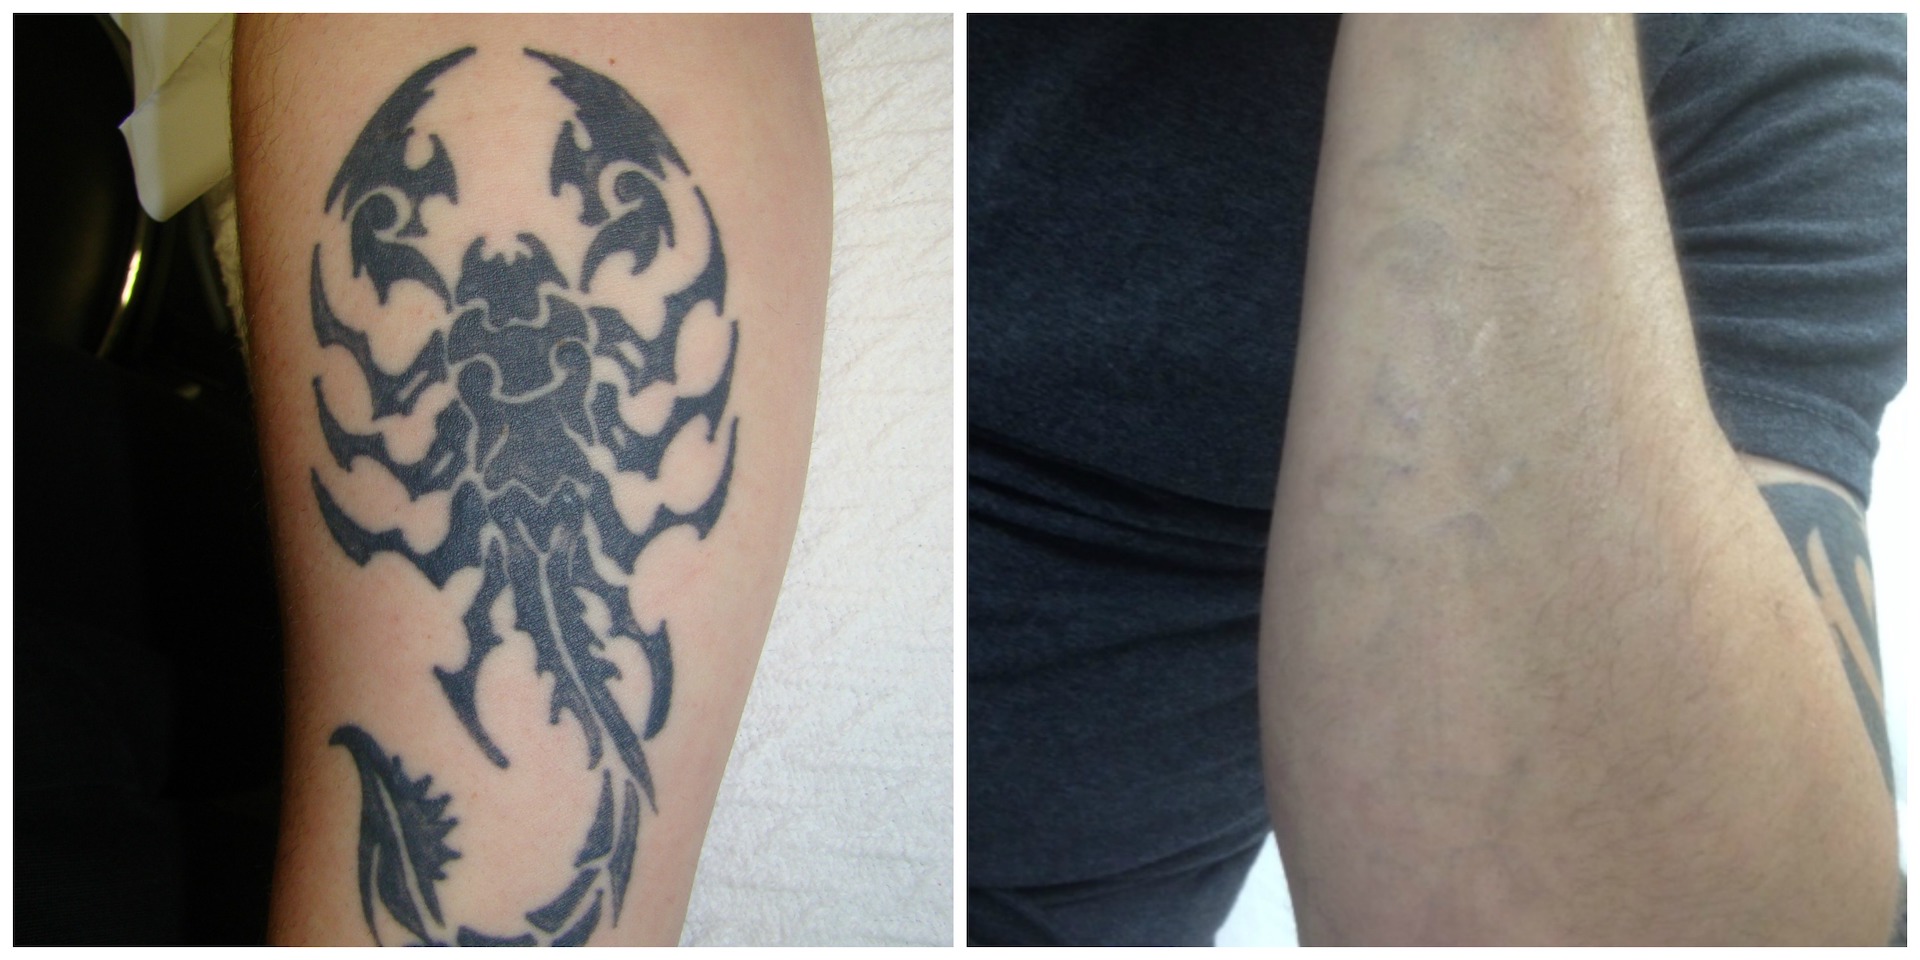 Tattoo removal facts about non-laser removal: saline, acid, oxides | Lynch  Dermapigmentology